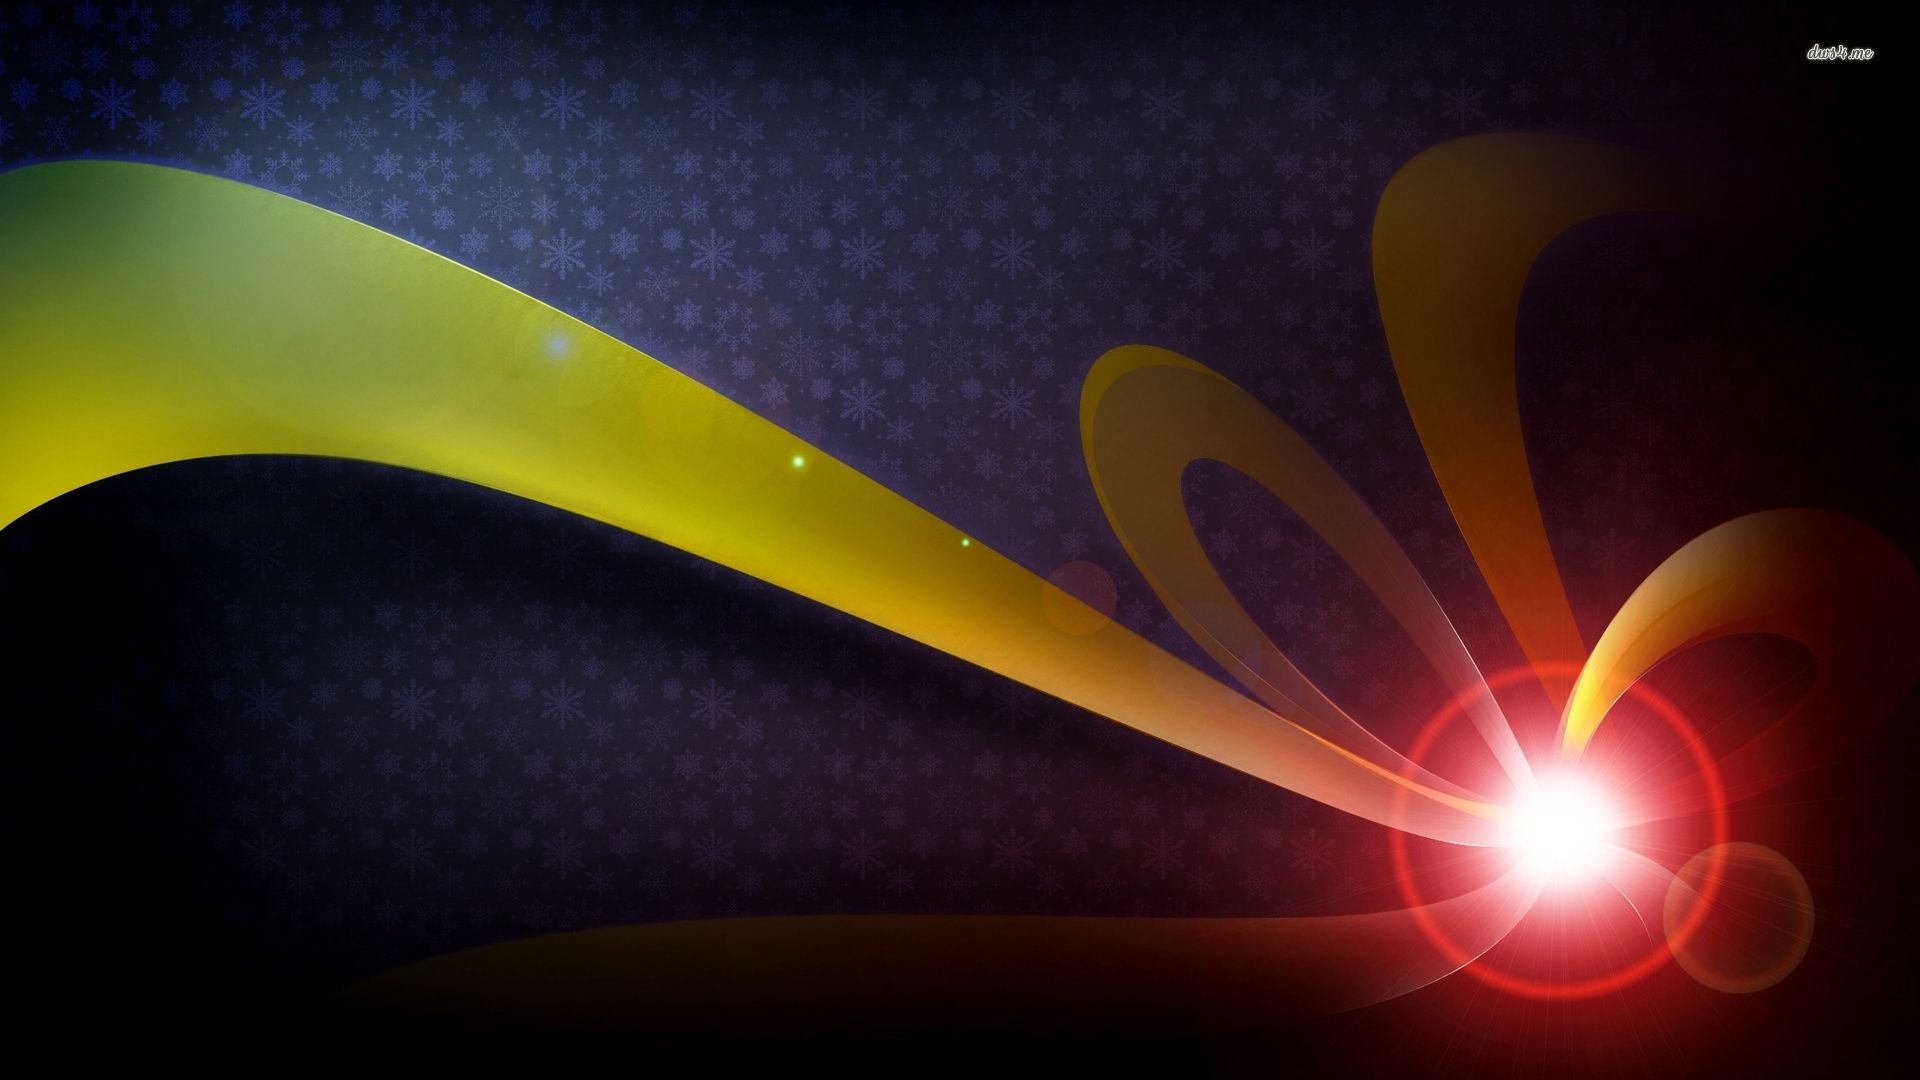 Golden Ribbon By The Bright Red Sun Wallpaper - Graphic Design , HD Wallpaper & Backgrounds